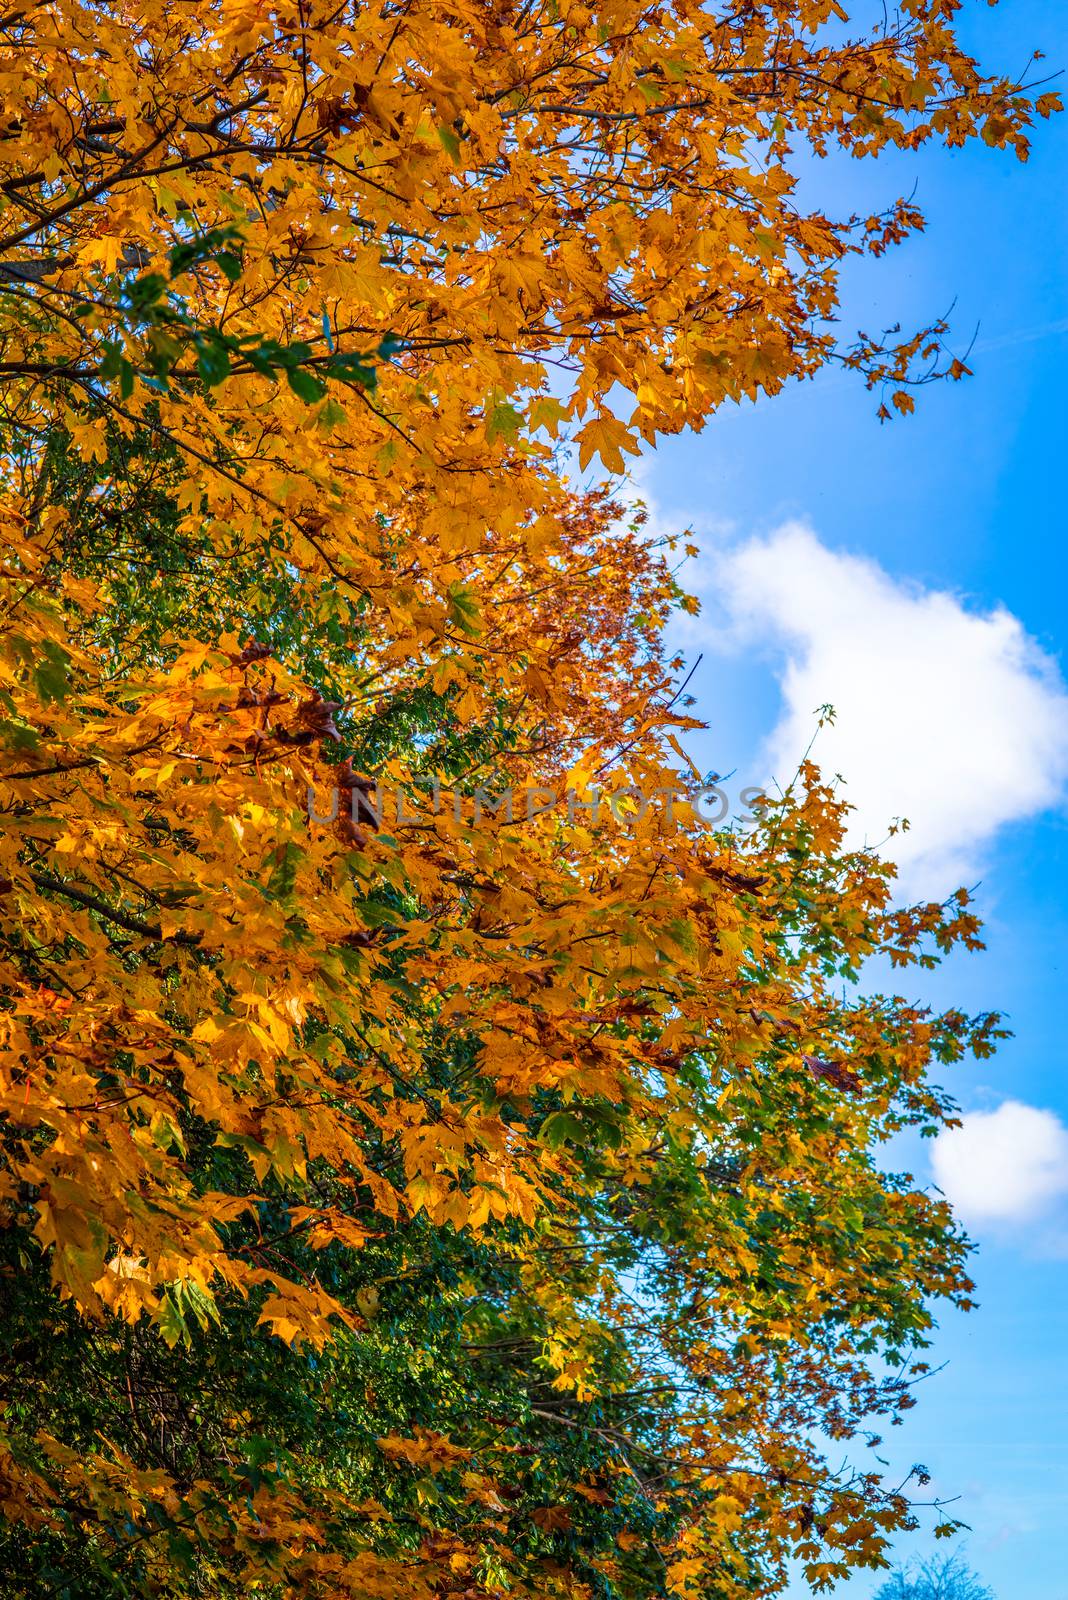 Autumn leaves on a tree on a sunny day by Sportactive